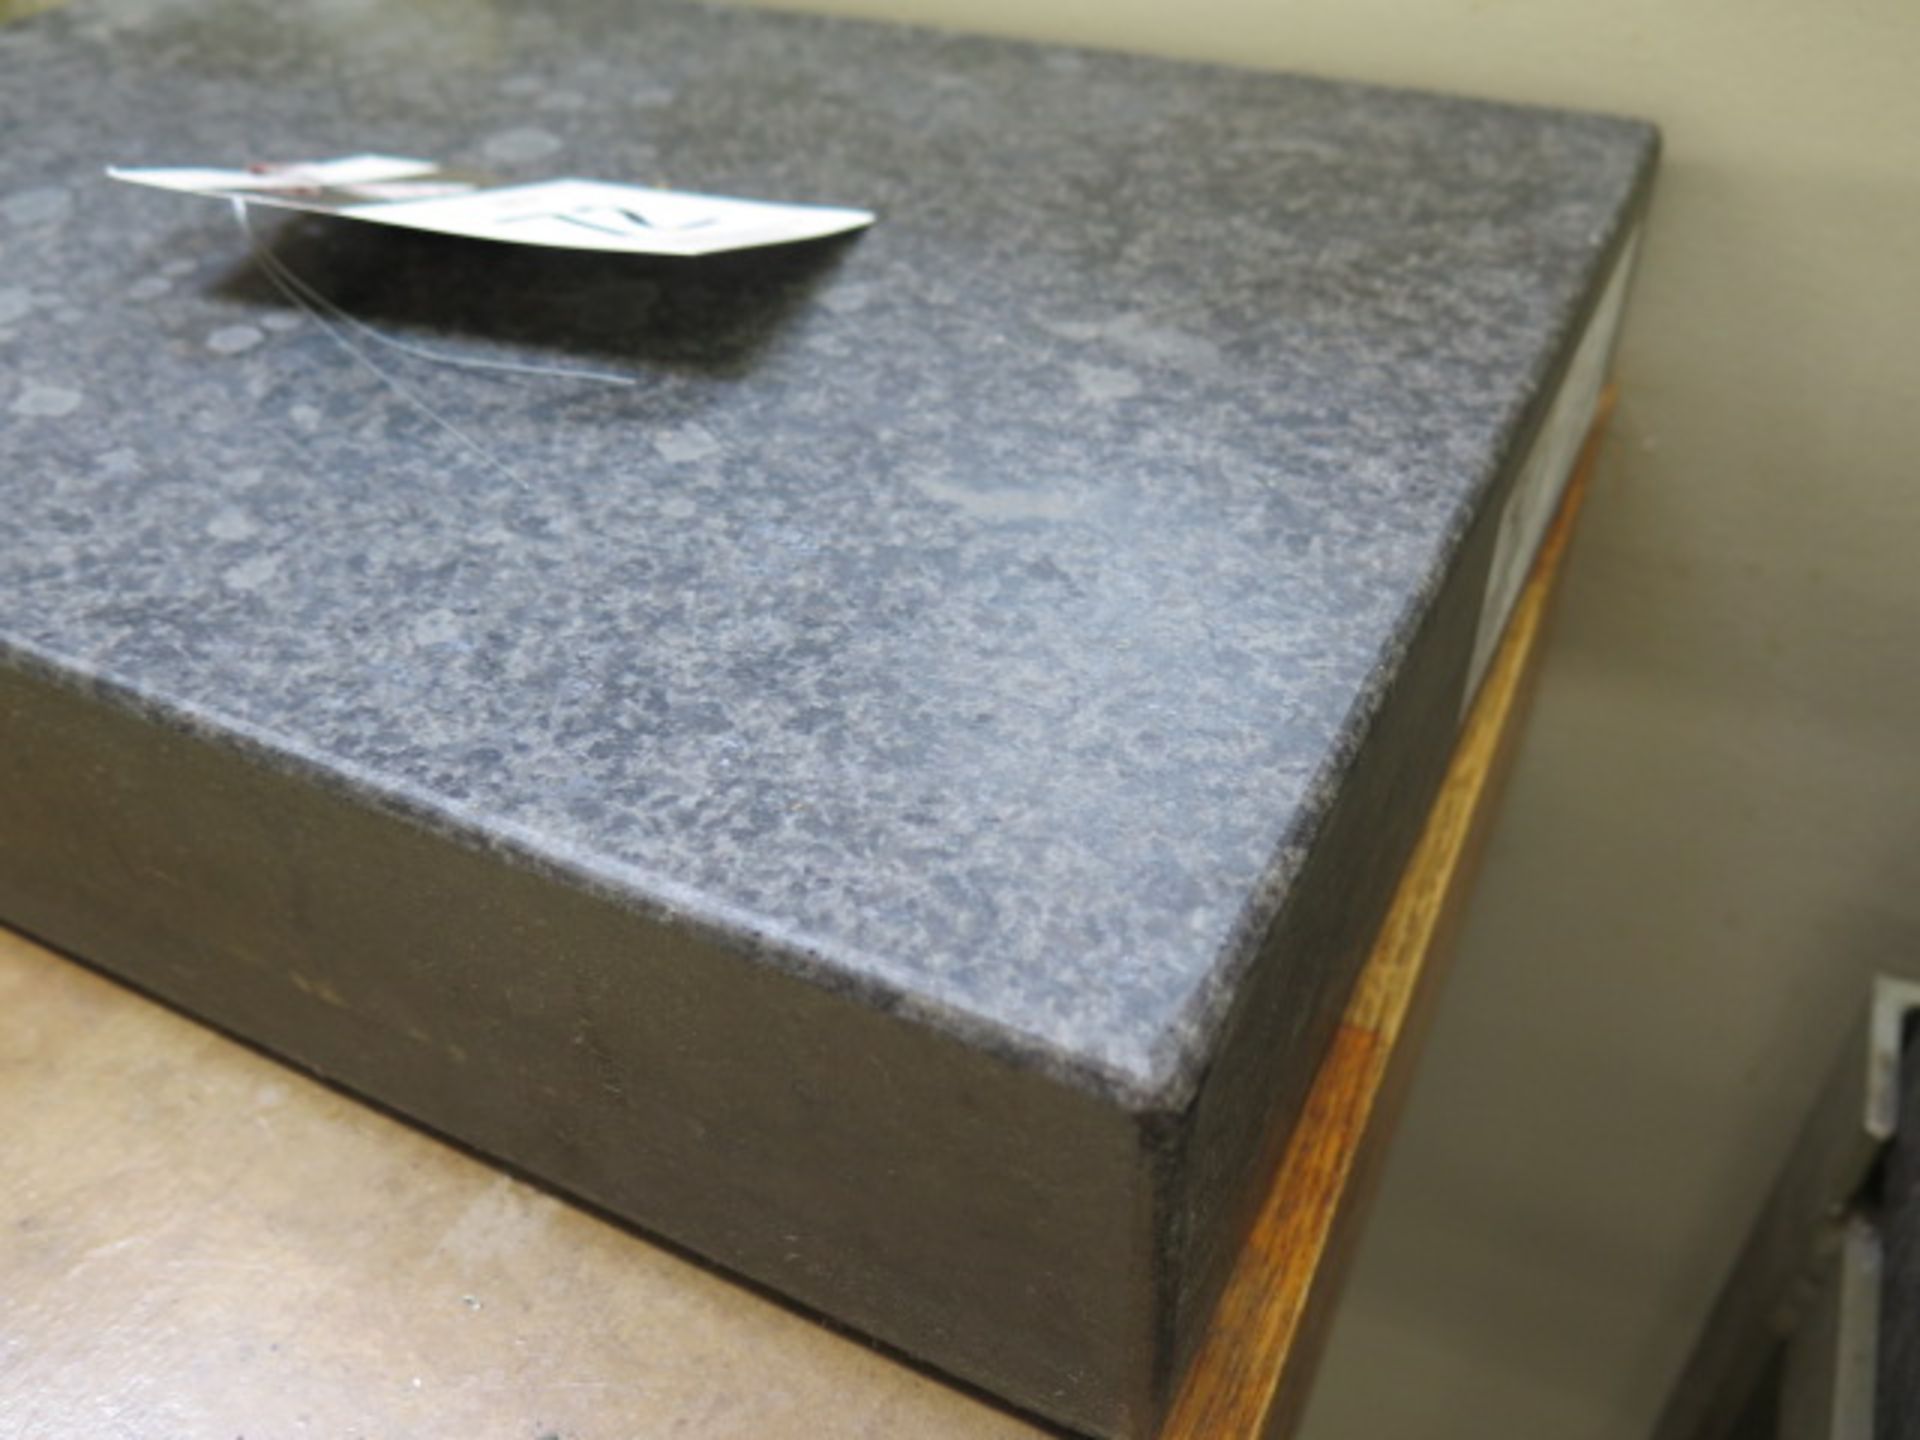 12" x 18" x 3" Granite Surface Plate (SOLD AS-IS - NO WARRANTY) - Image 3 of 3